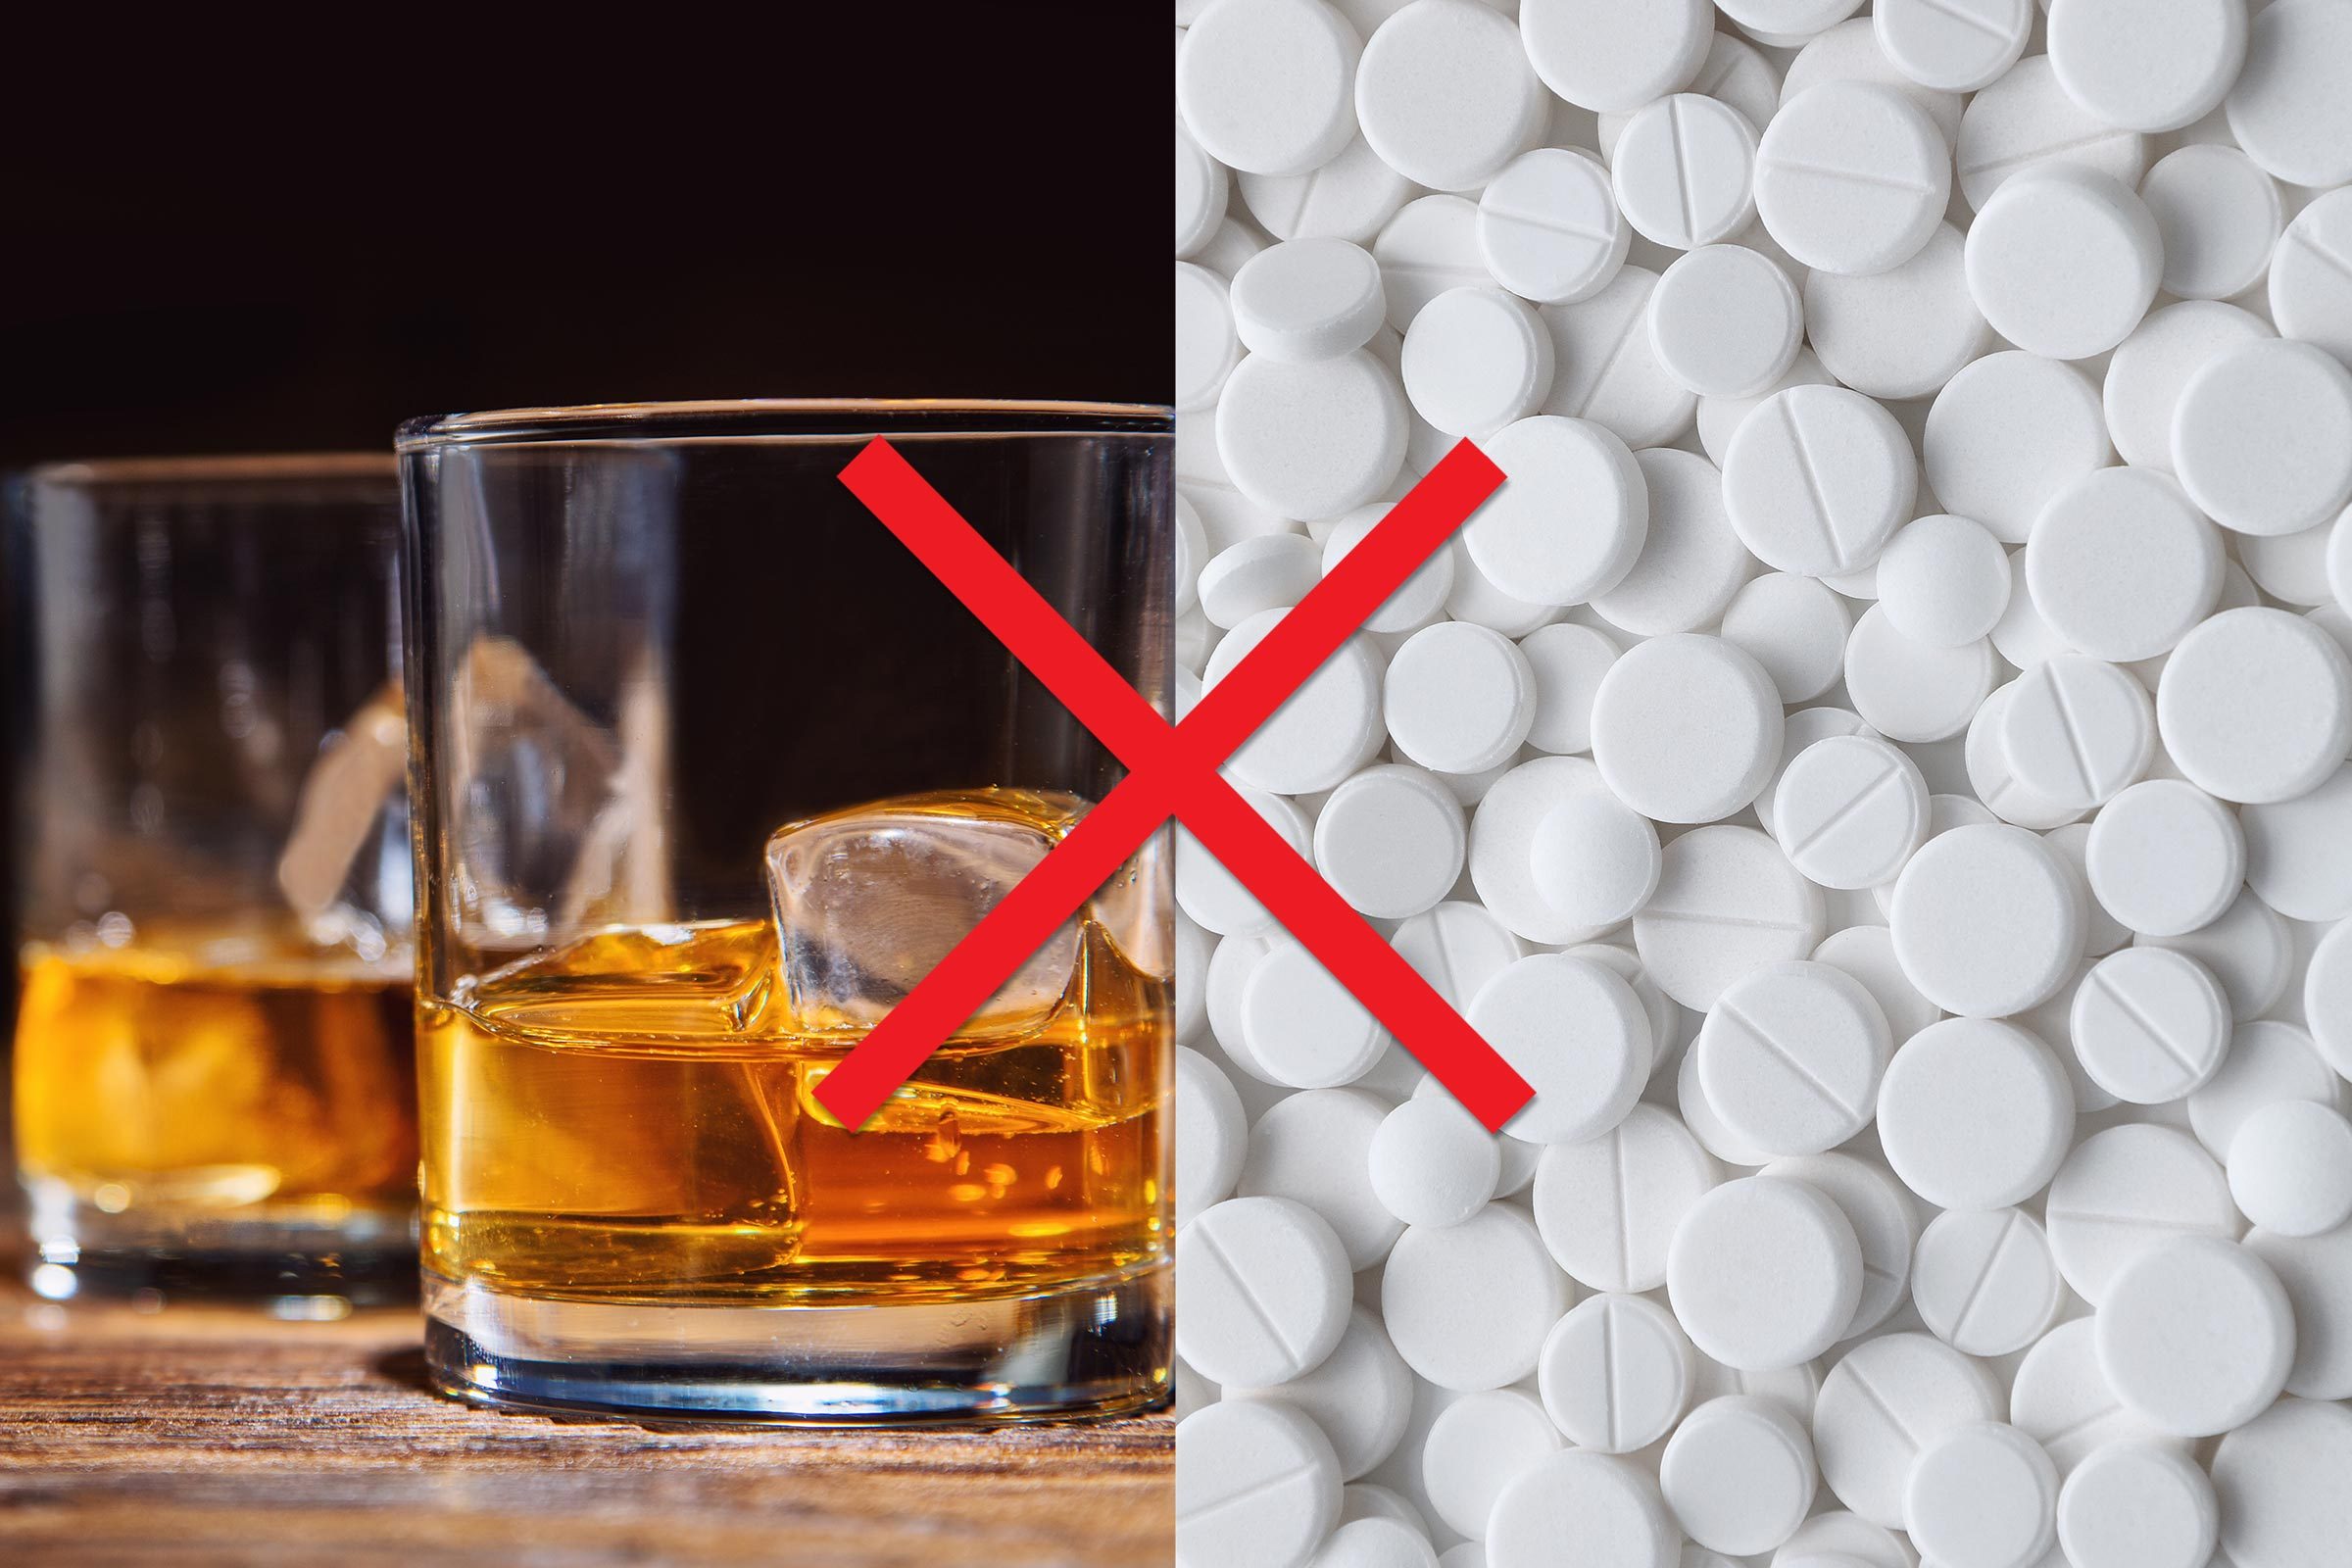 Xanax Painkillers And Alcohol